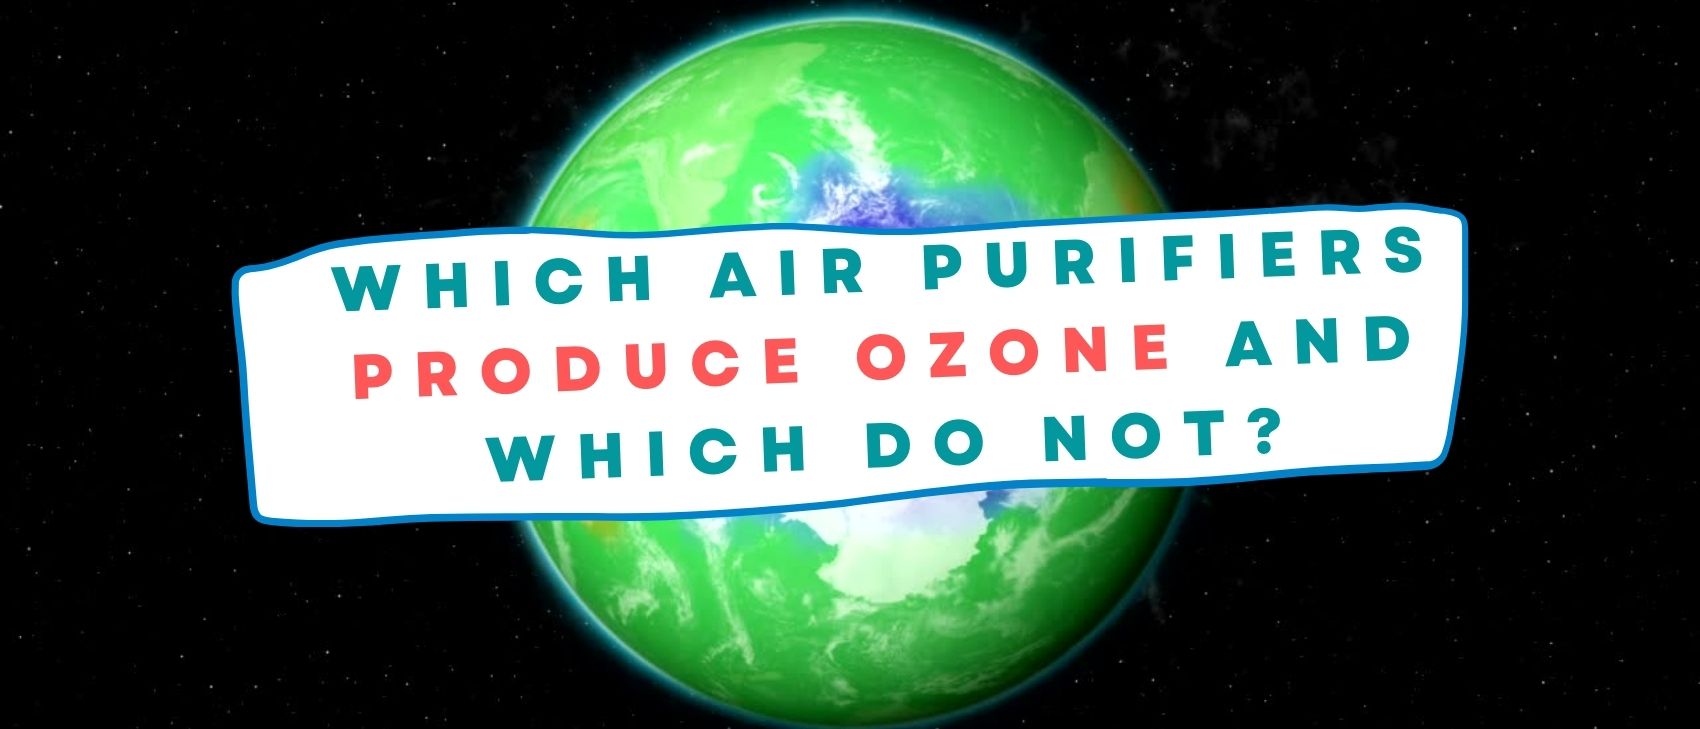 Which Air Purifiers Produce Ozone and Which Do Not?